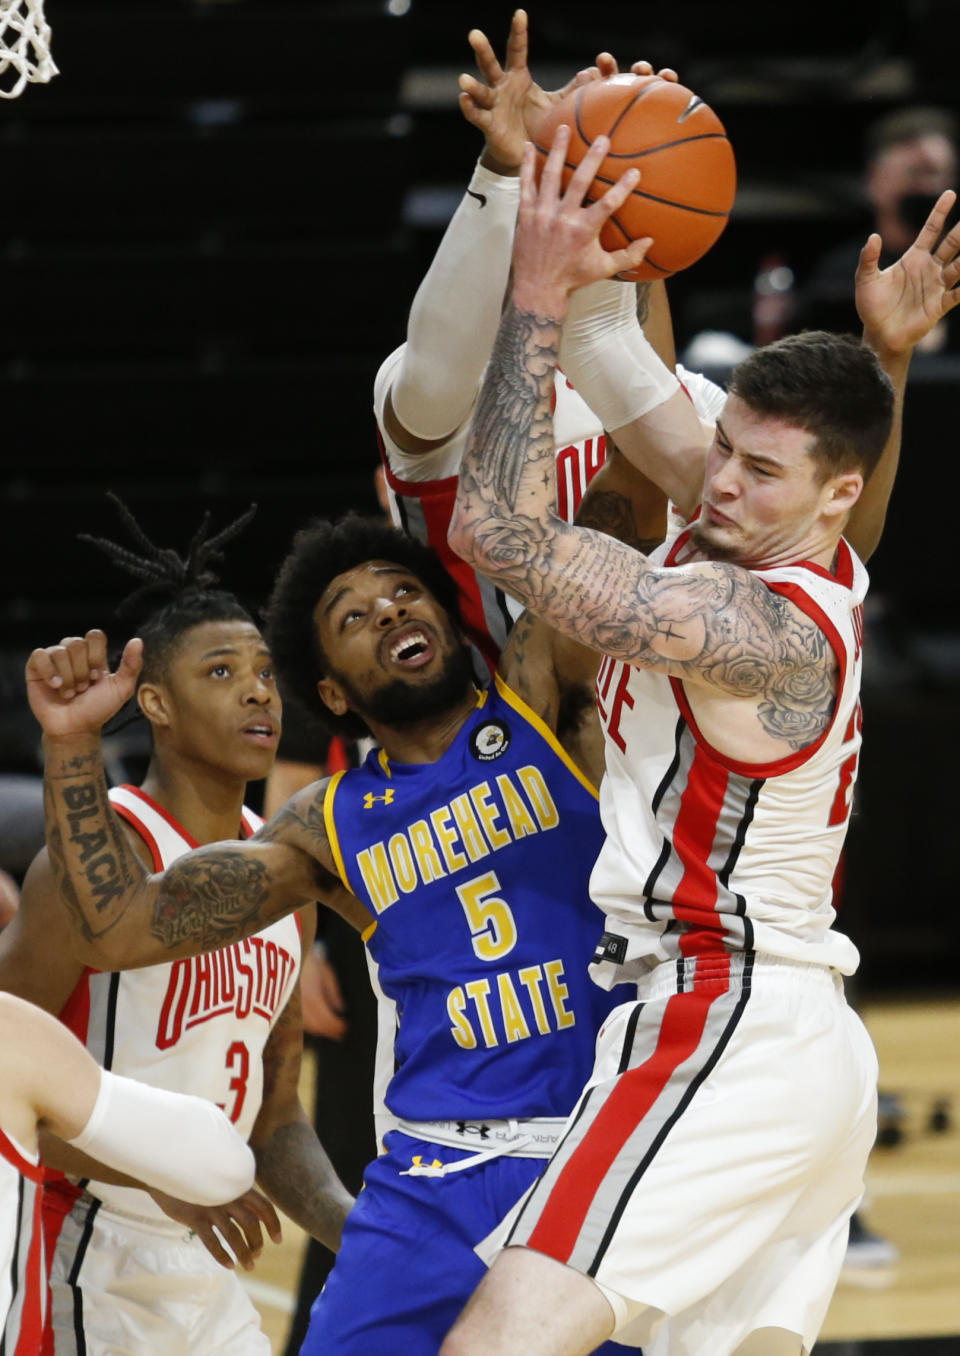 Morehead State forward James Baker (5) works for a rebound against Ohio State forward Kyle Young during the first half of an NCAA college basketball game in Columbus, Ohio, Wednesday, Dec. 2, 2020. (AP Photo/Paul Vernon)